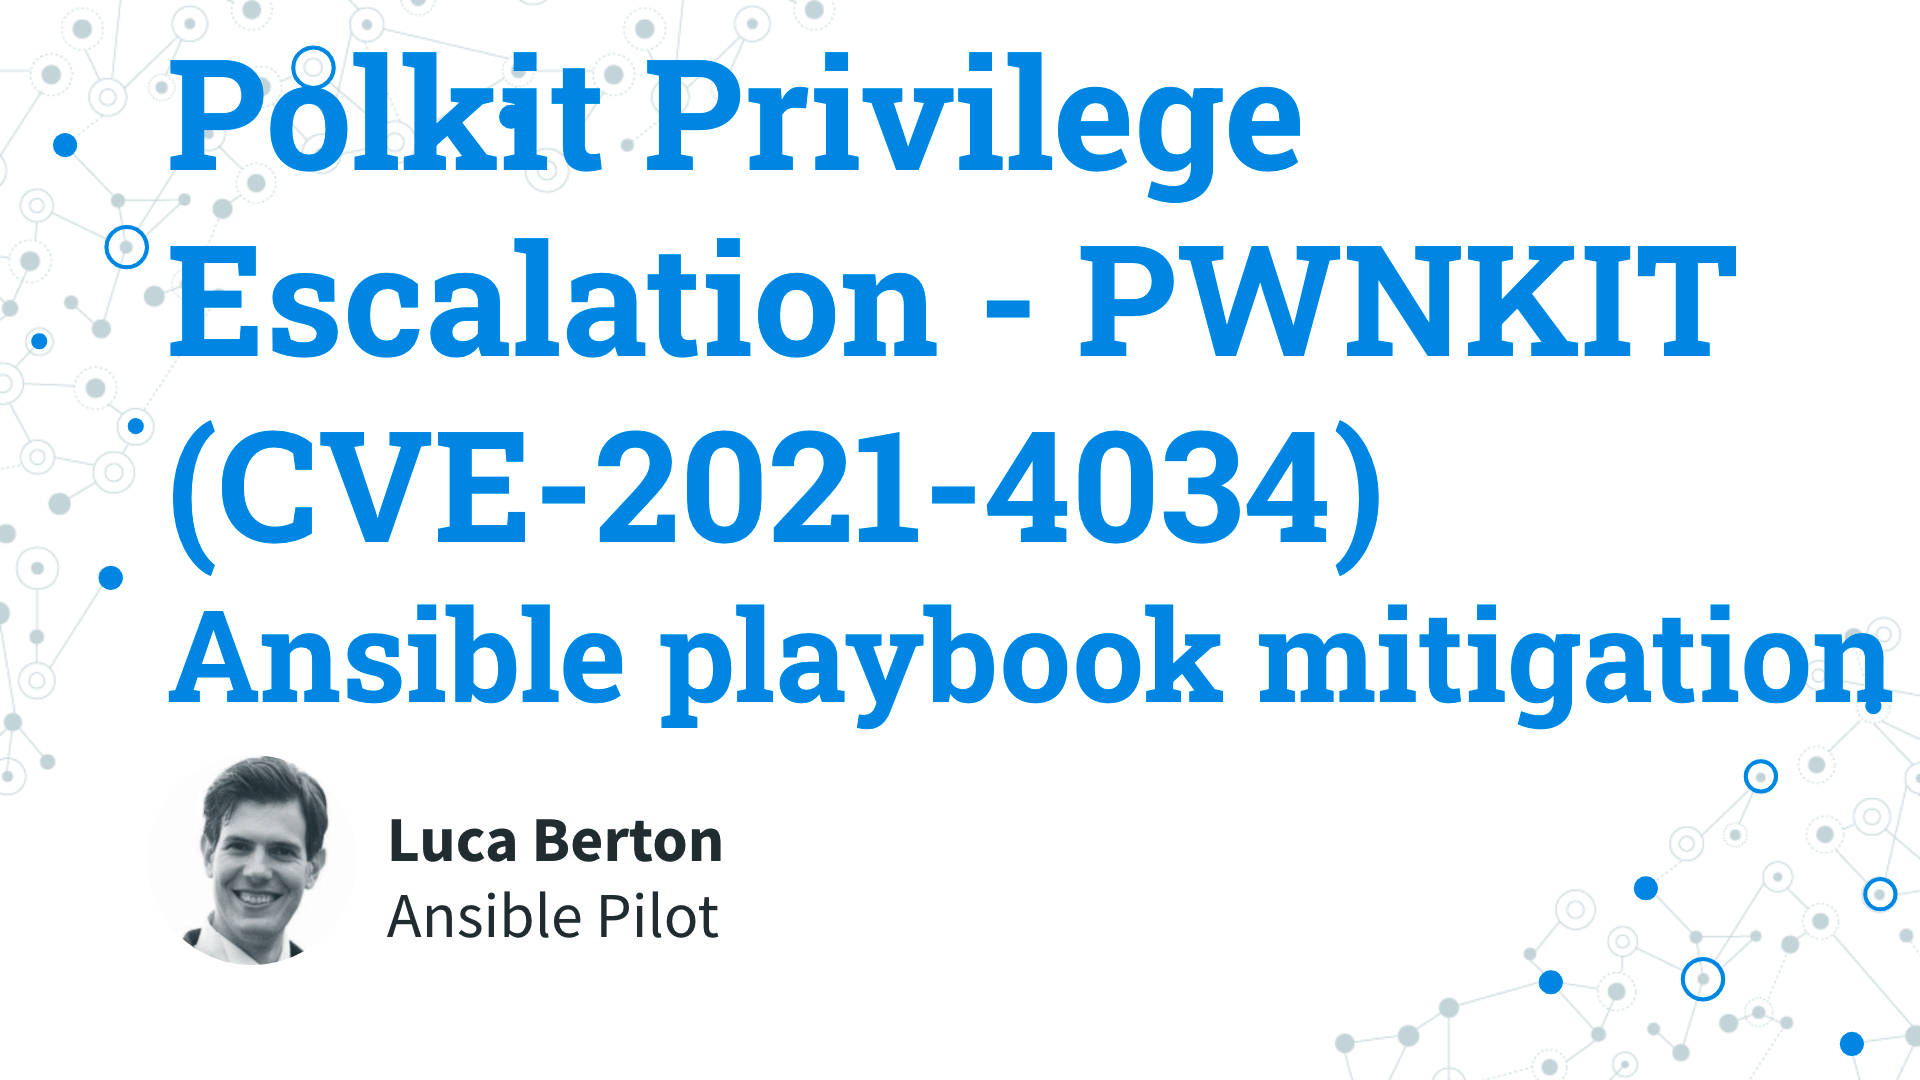 How to mitigate Polkit Privilege Escalation - PWNKIT (CVE-2021-4034) on RedHat-like systems - Ansible playbook mitigation